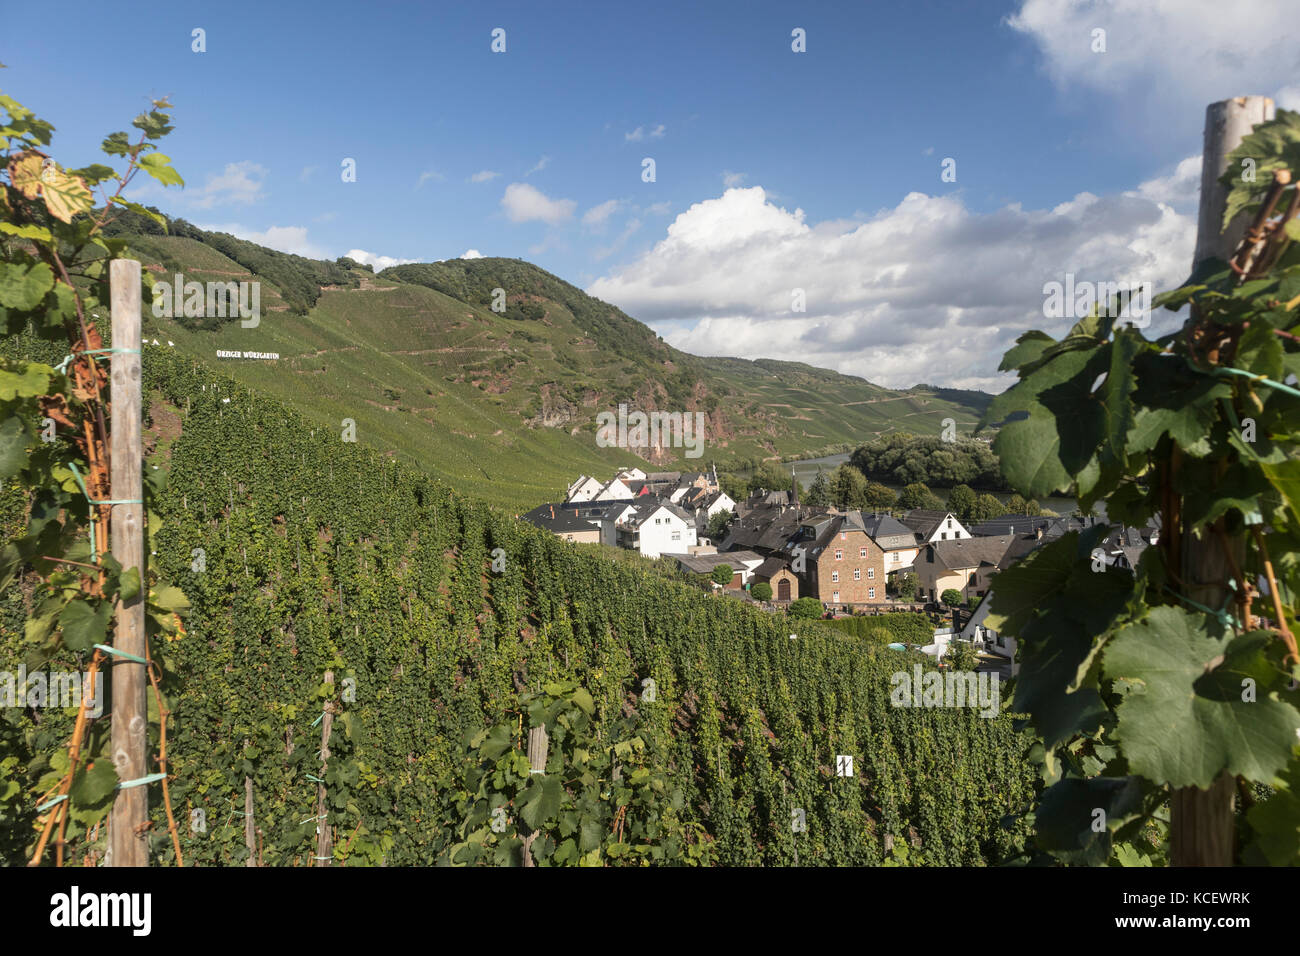 The vineyards and town of Urzig, in the Mosel Valley, Germany Stock Photo